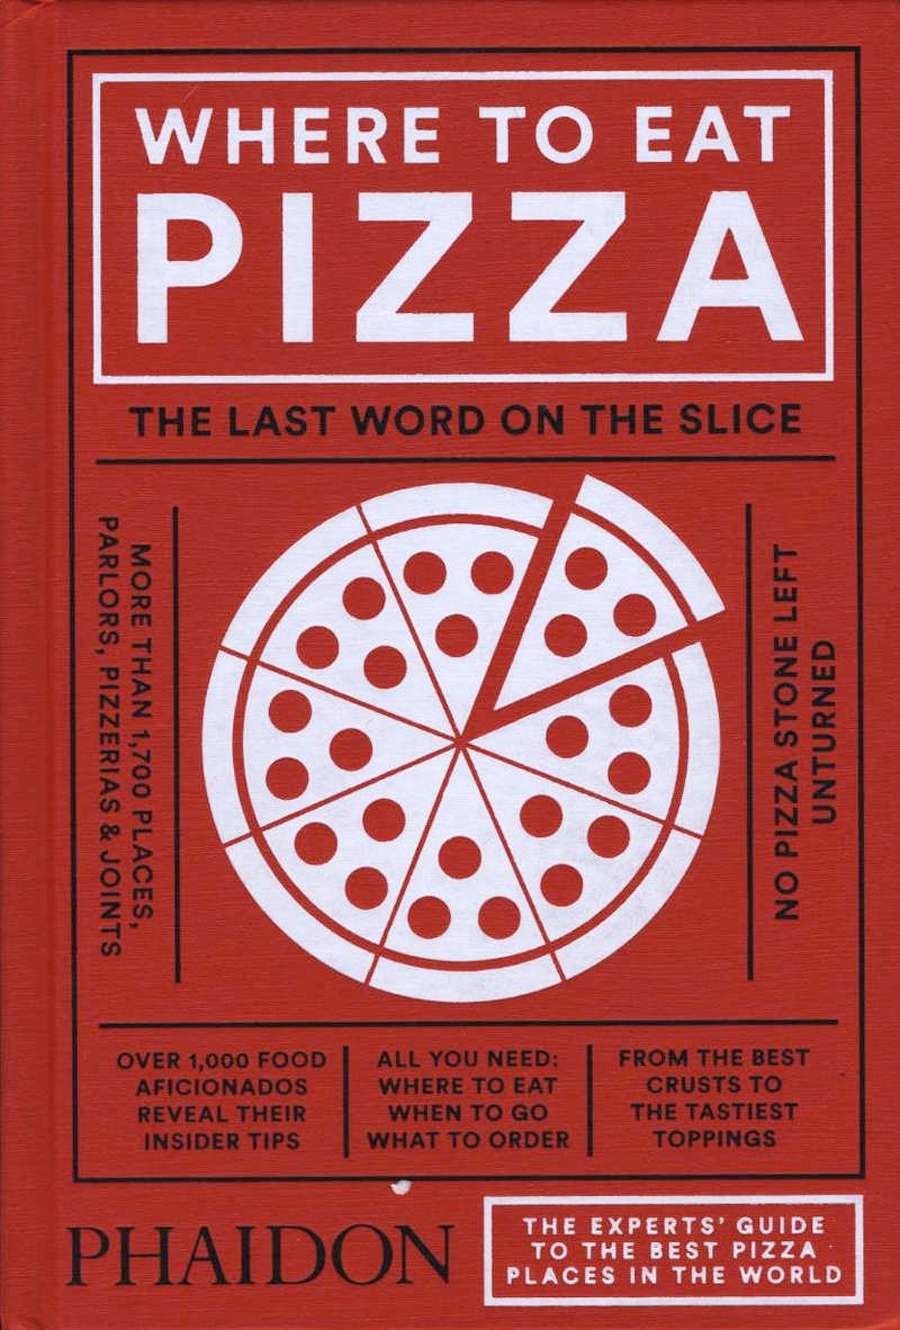 Where to Eat Pizza by Daniel Young